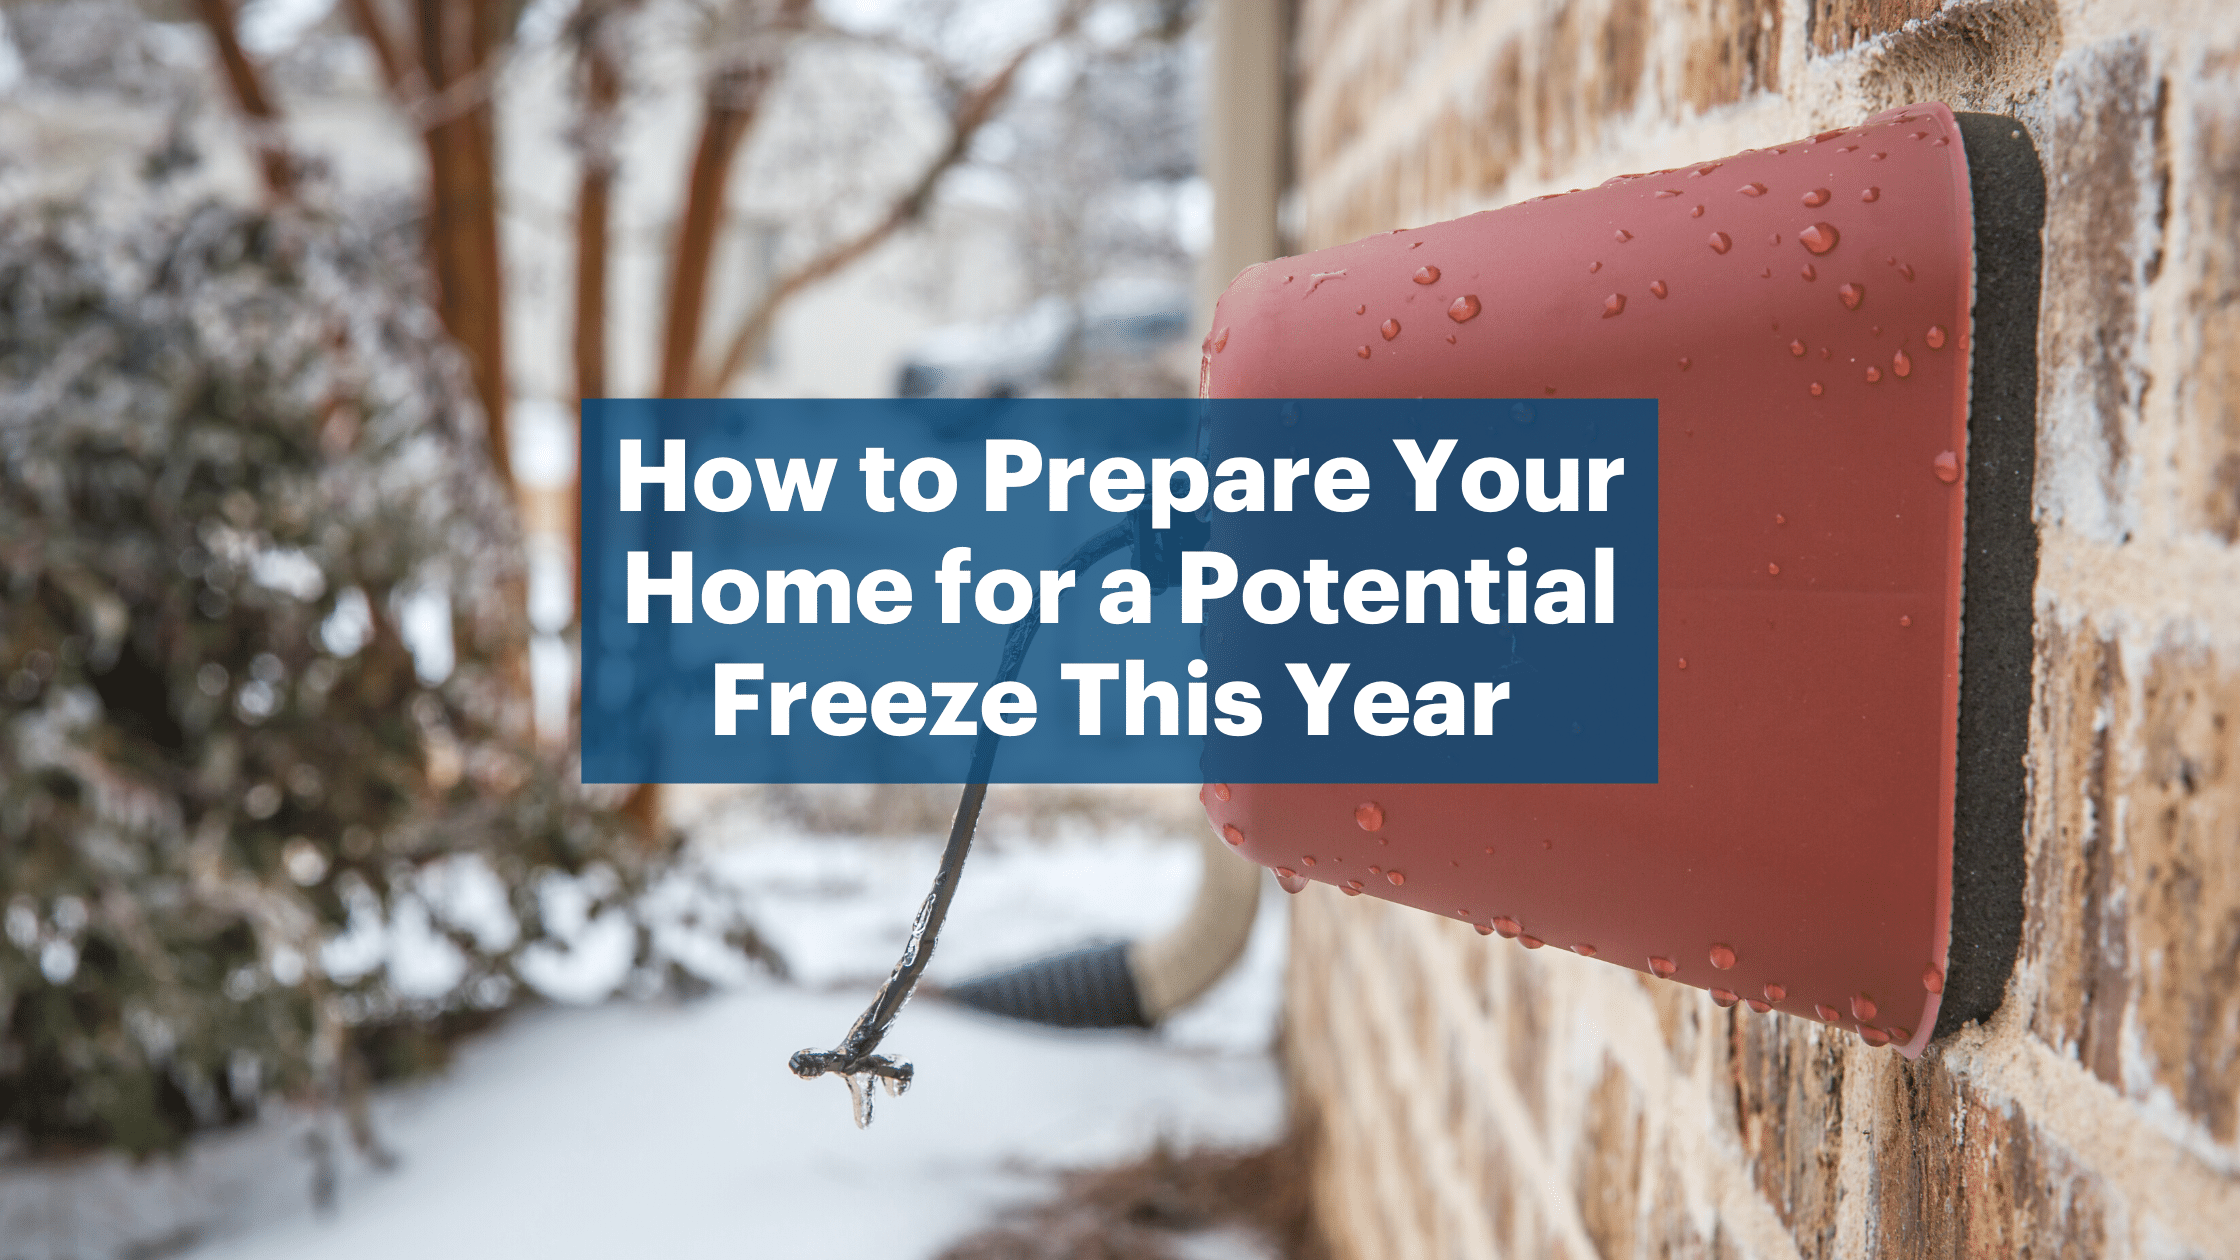 How to Prepare Your Home for a Potential Freeze This Year